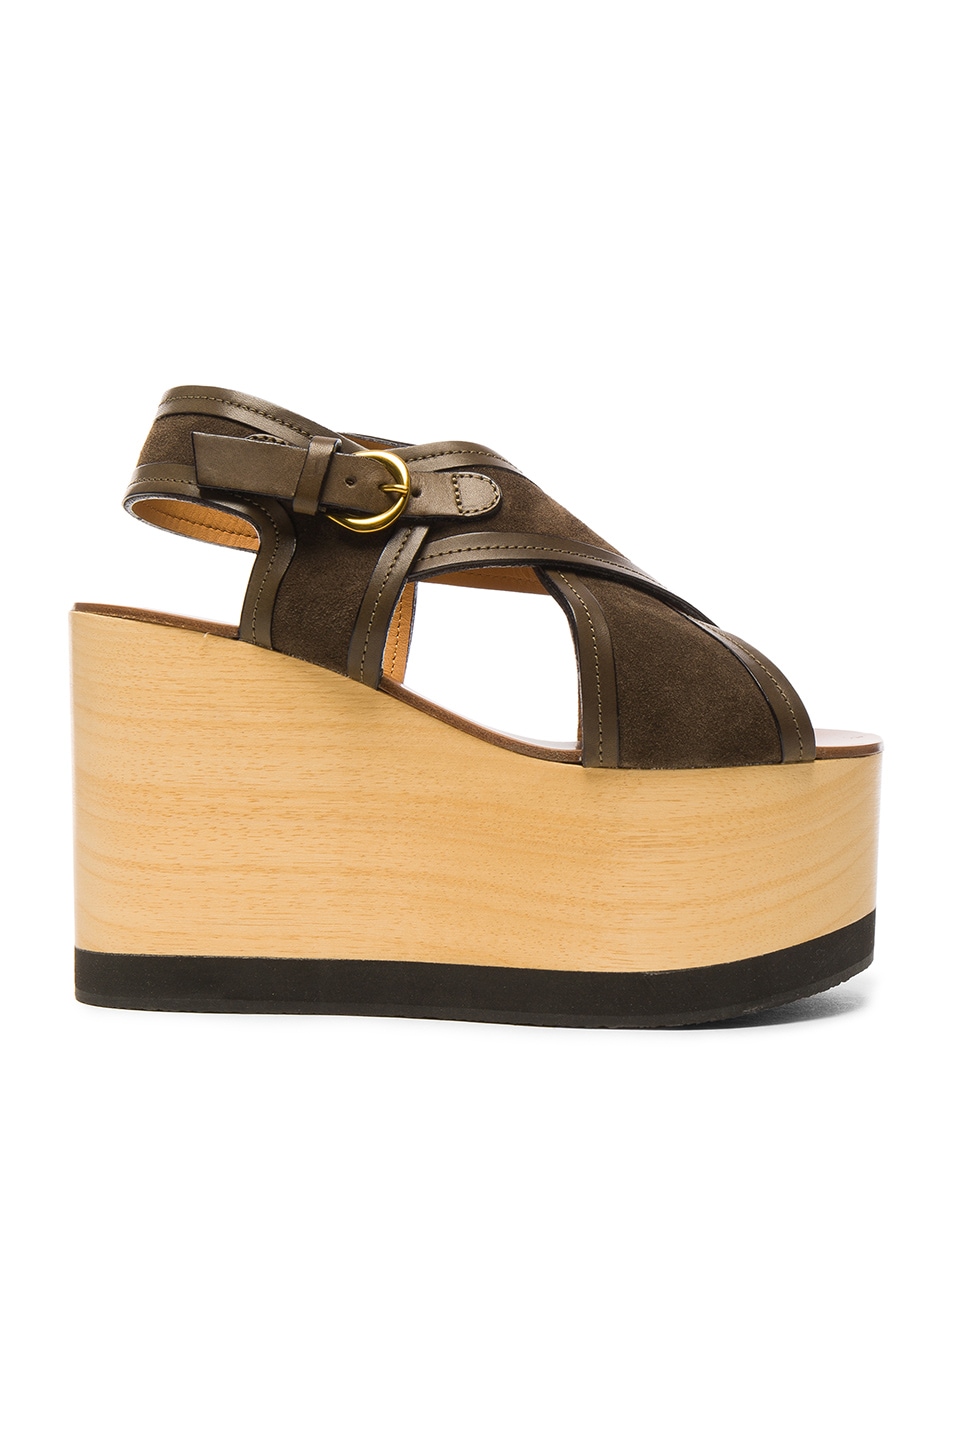 3 Stores In Stock: ISABEL MARANT Zlova Cross-Strap Canvas Wedges ...